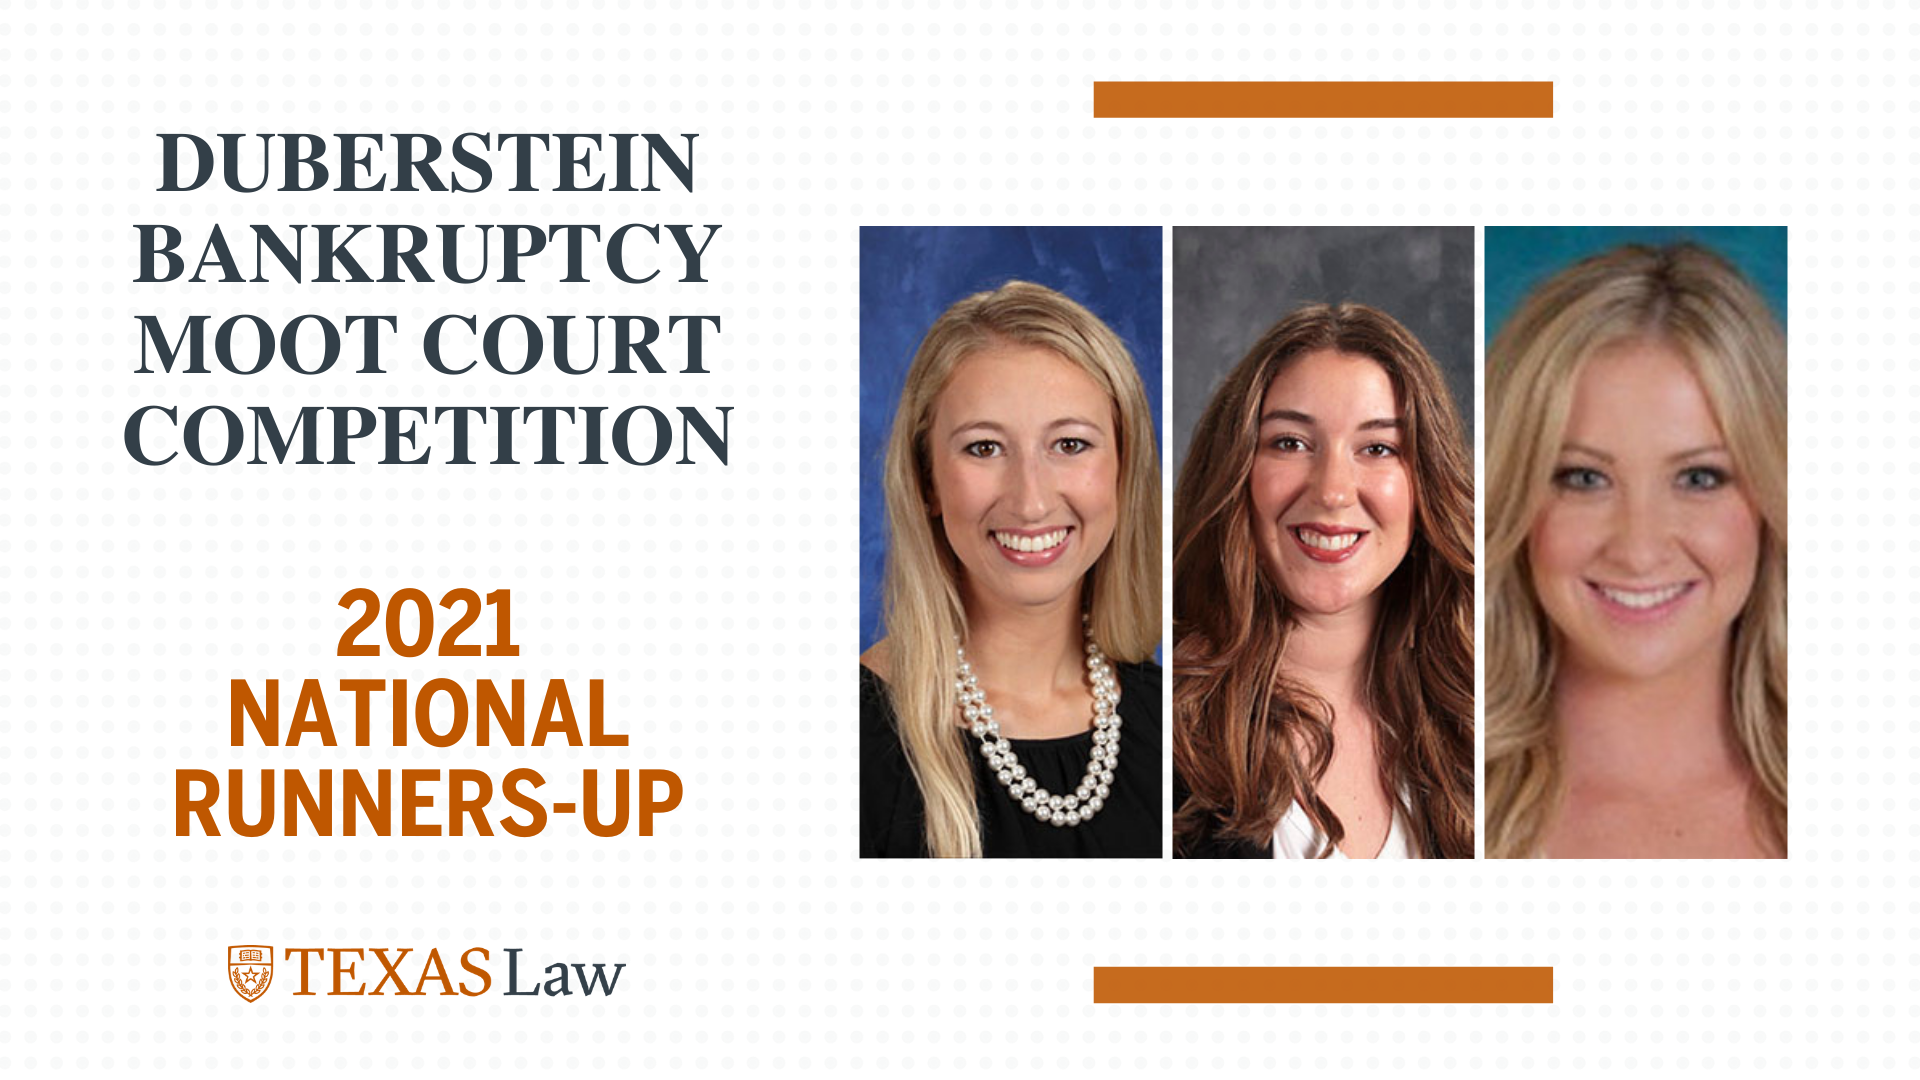 Duberstein Bankruptcy Moot Court Competition, headshots of three winners